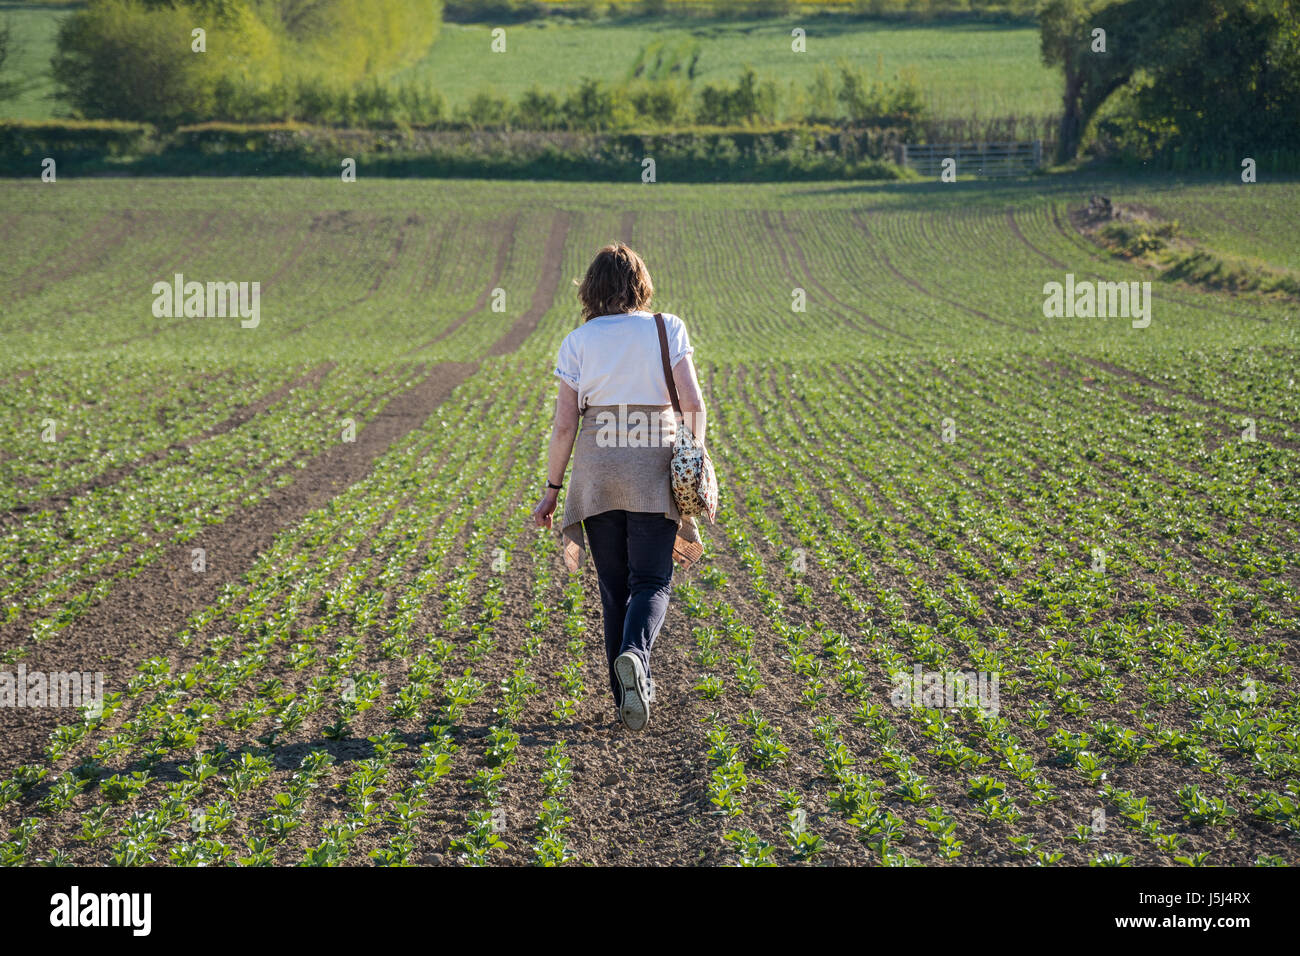 Woman walking through a field of broad bean seedlings on a sunny day, Shropshire, UK. It could represent the idea of new beginnings, a fresh start. Stock Photo